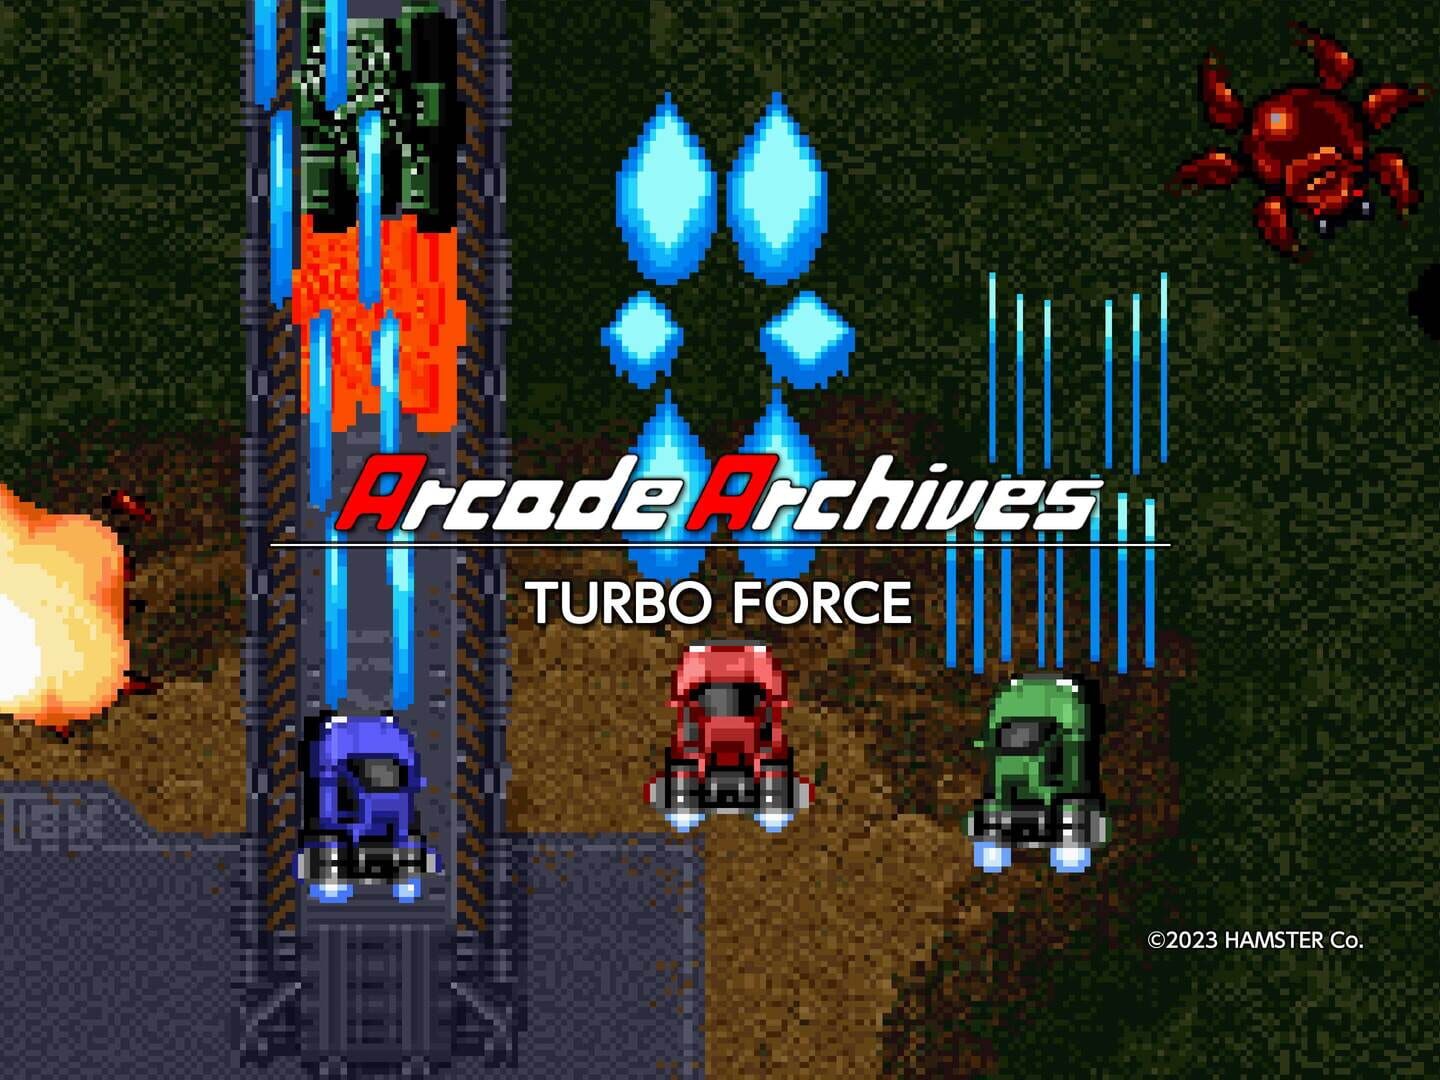 Arcade Archives: Turbo Force artwork